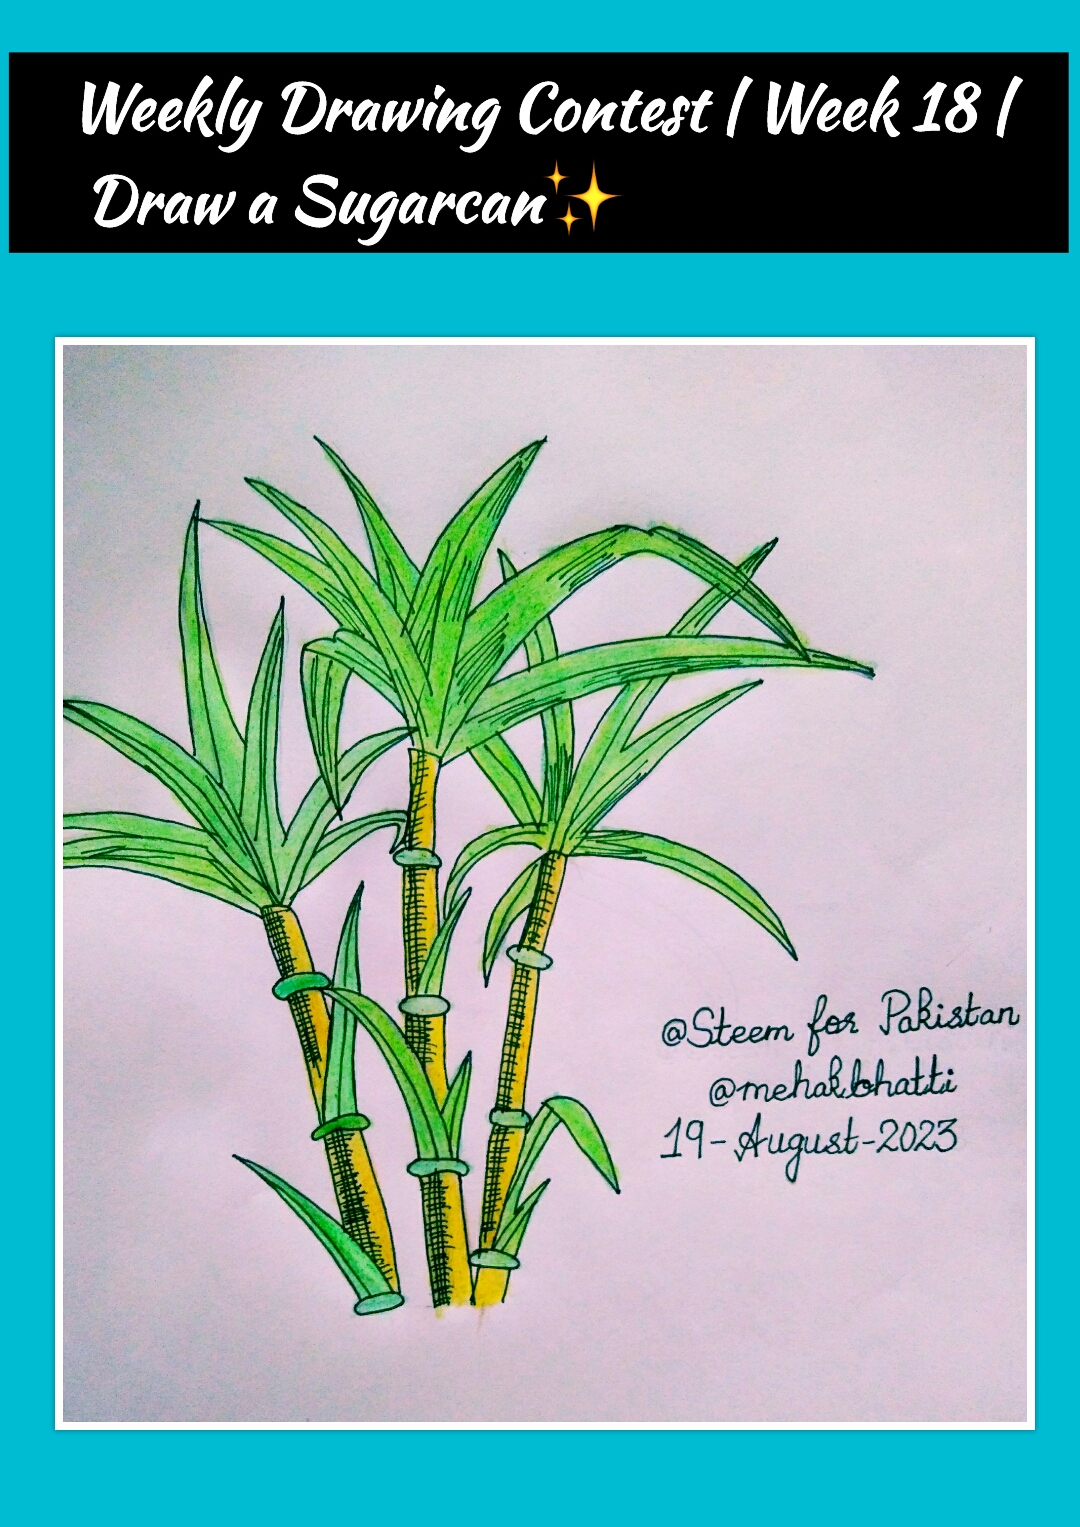 how to draw sugarcane #easy way to draw sugarcane step by step - YouTube